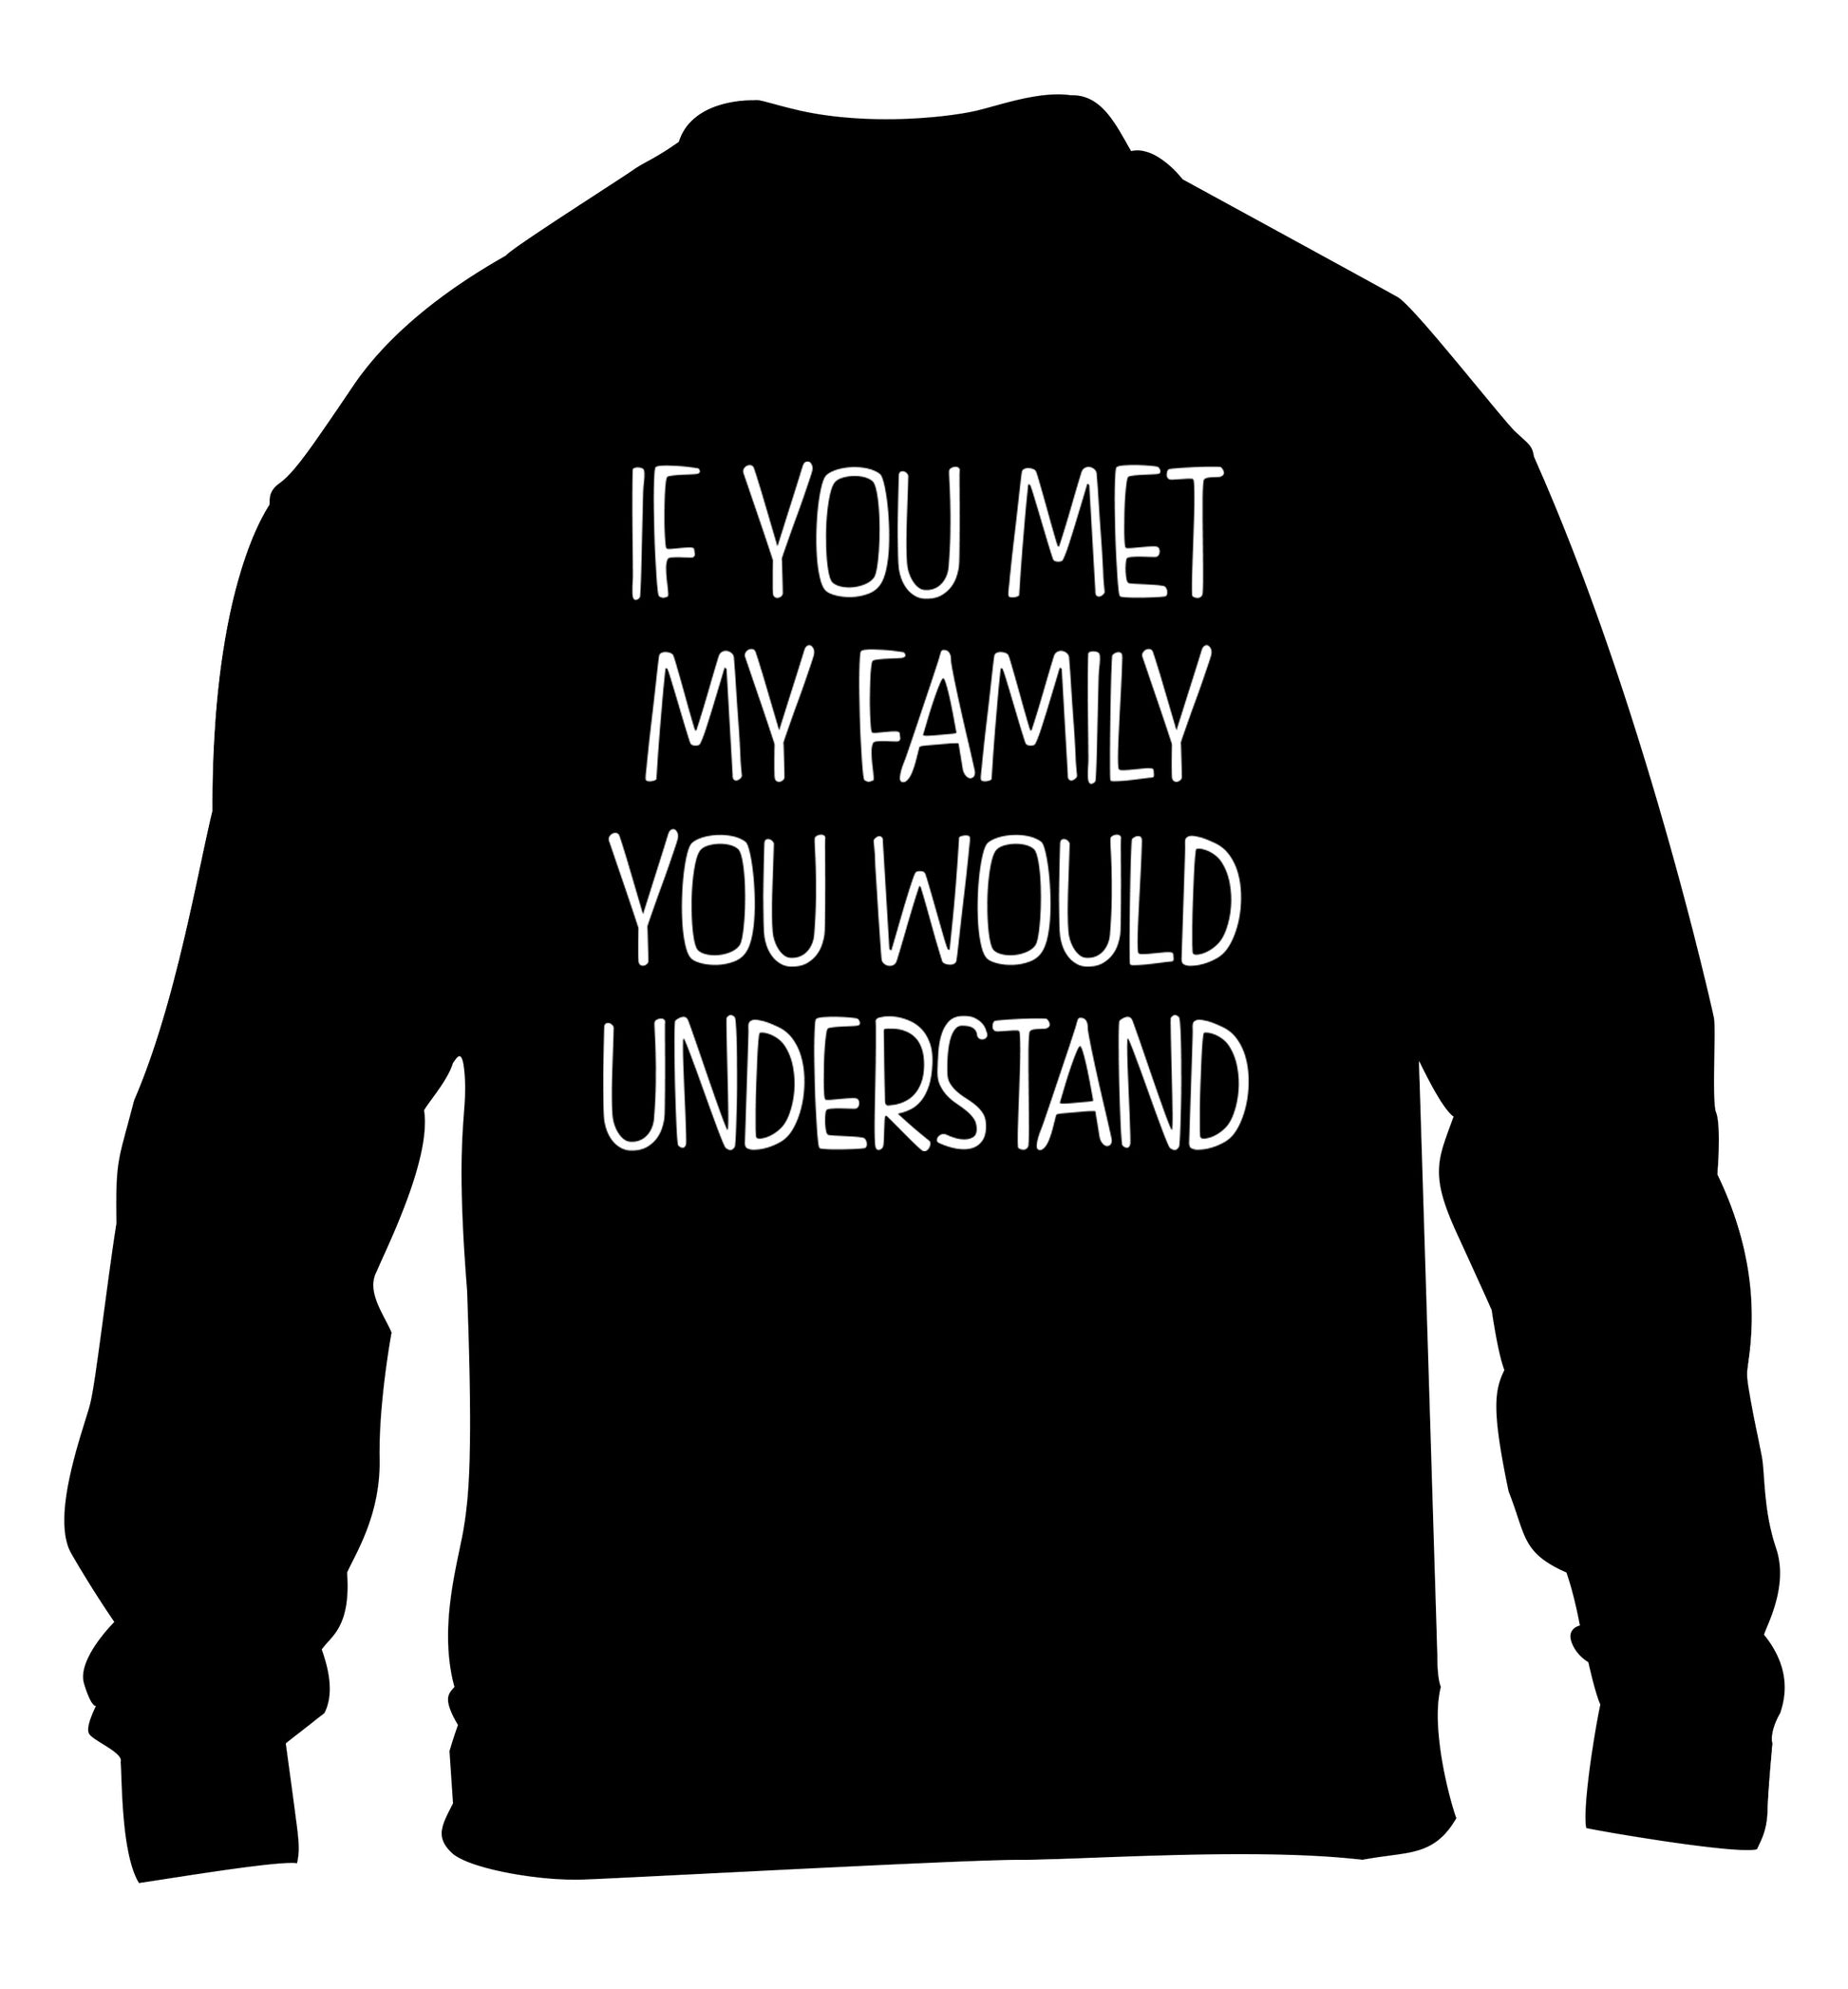 If you met my family you would understand children's black sweater 12-13 Years